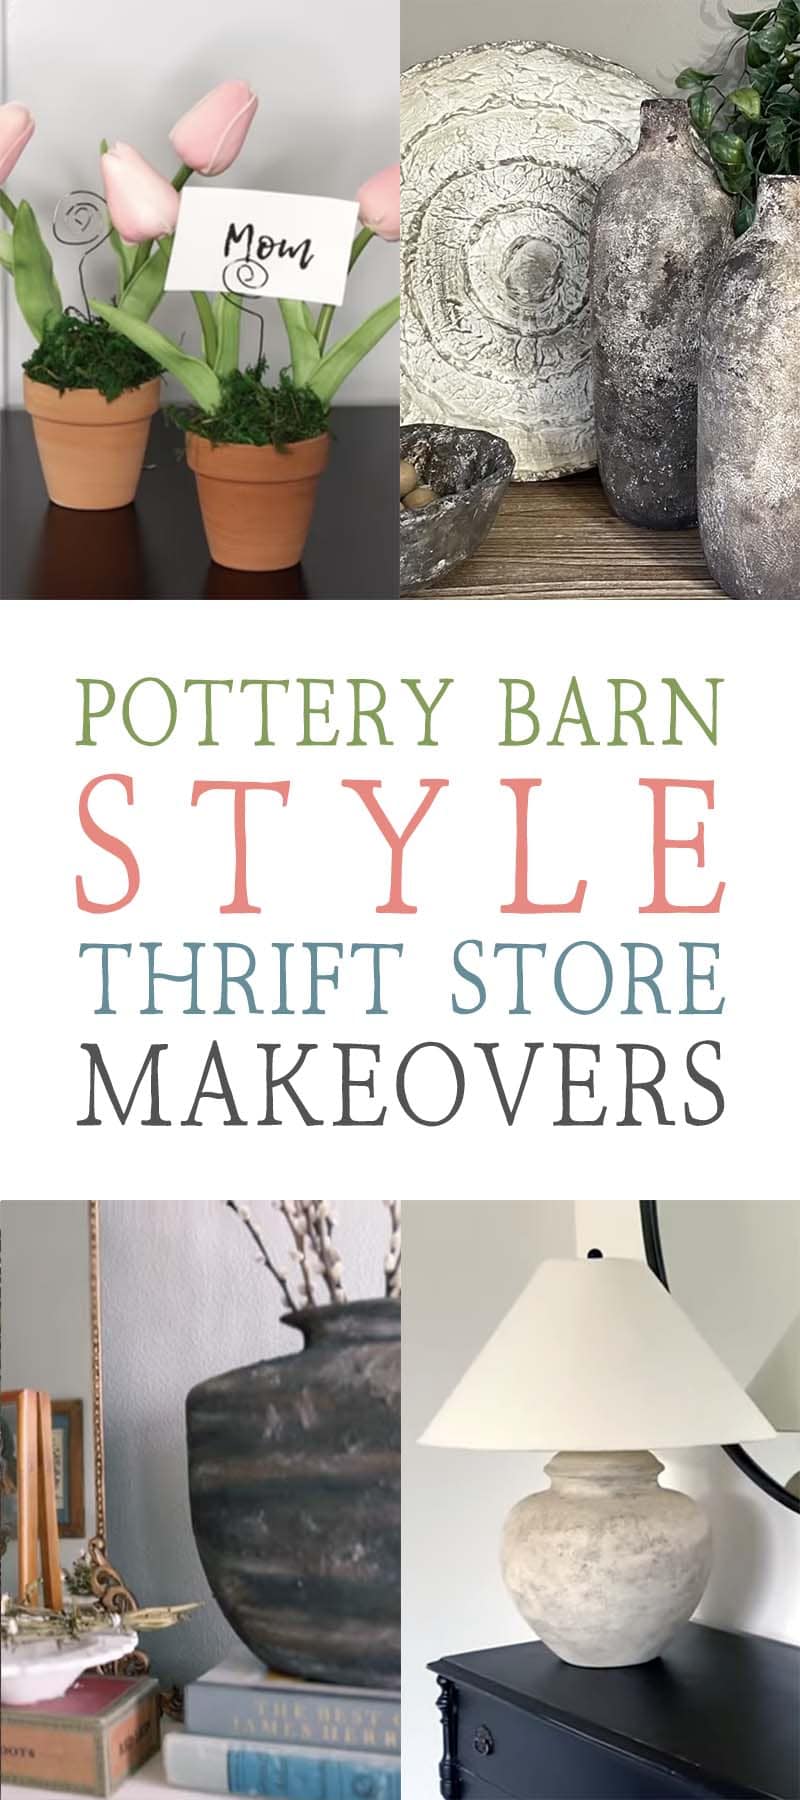 Pottery Barn Style Thrift Store Makeovers are going to Inspire you to create your own original diy project that will be amazing!y